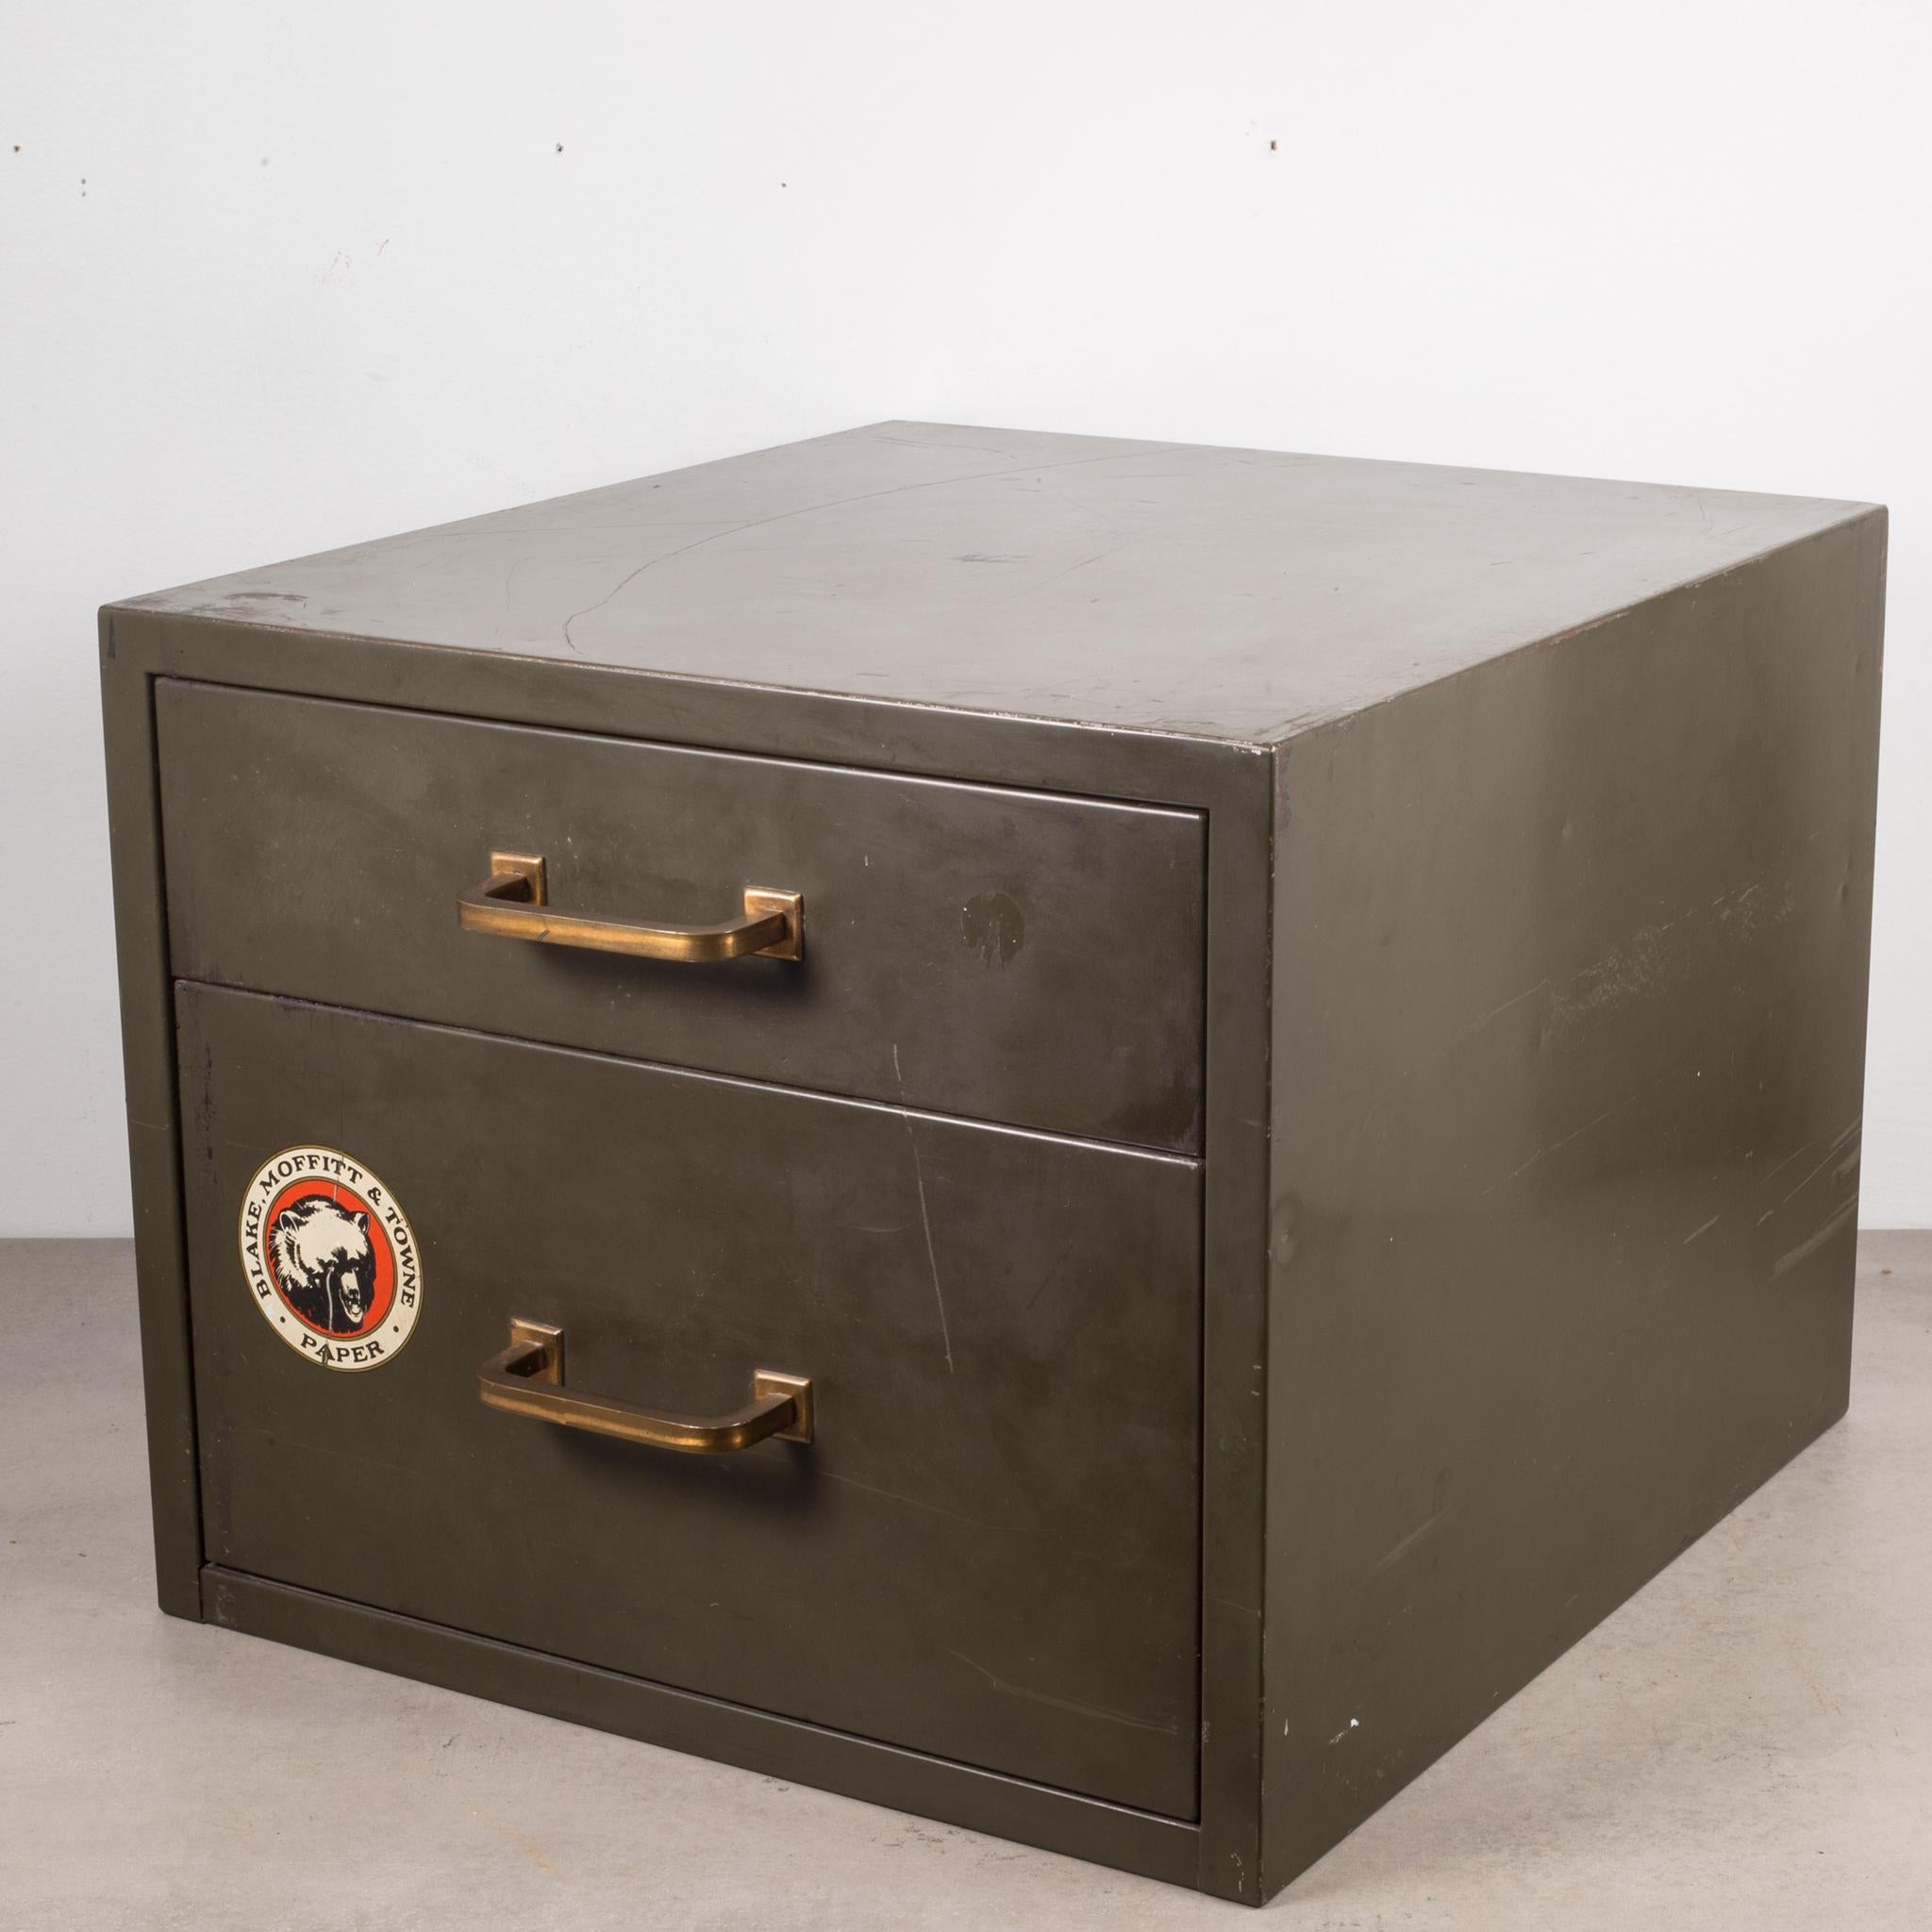 North American Industrial Factory Two-Drawer Cabinet with Brass Pulls, circa 1940